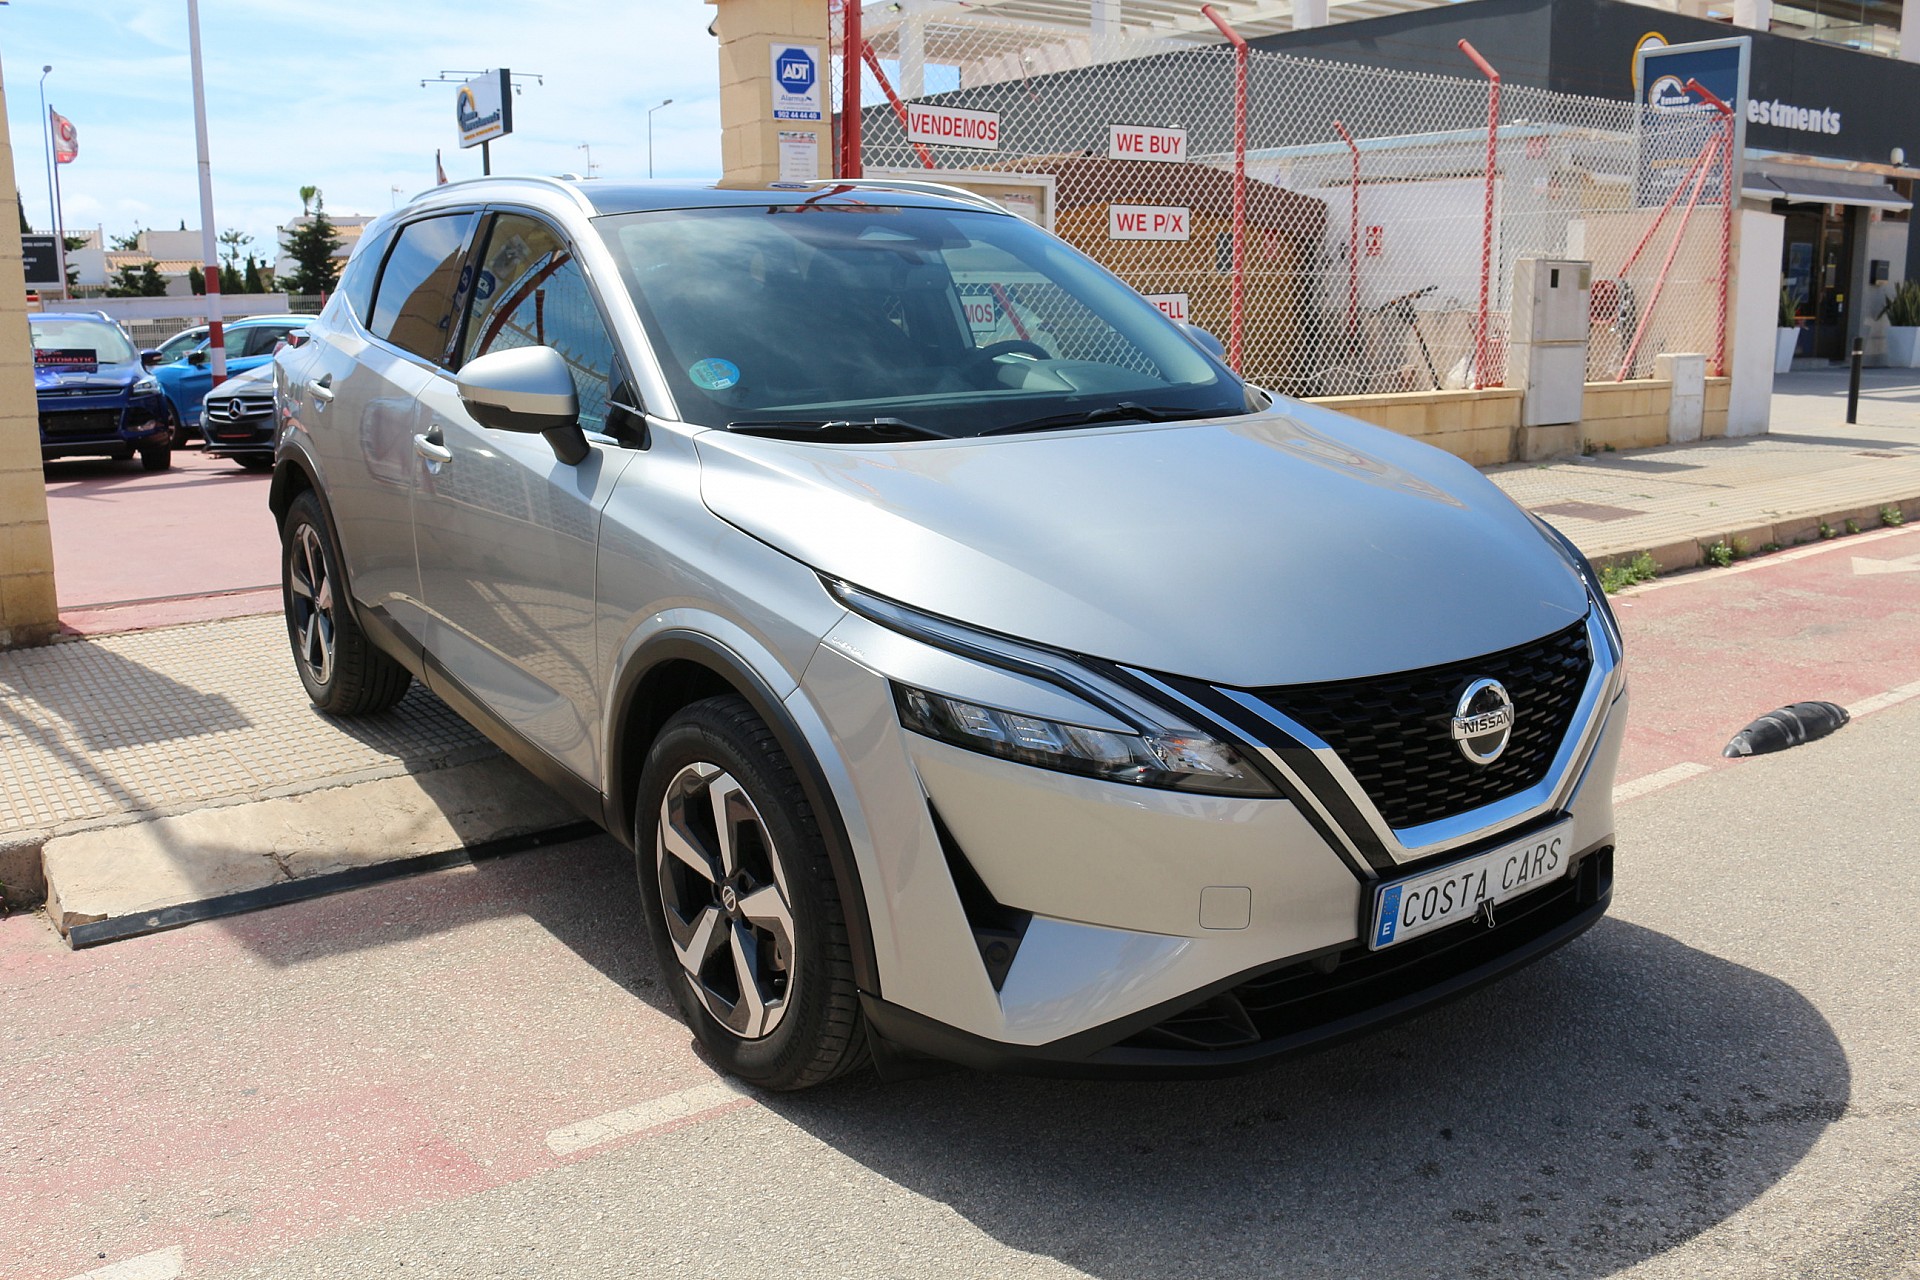 Nissan QASHQAI 1.3 DIG-T MHEV N-CONNECTA DCT  skyline pack - Costa Cars